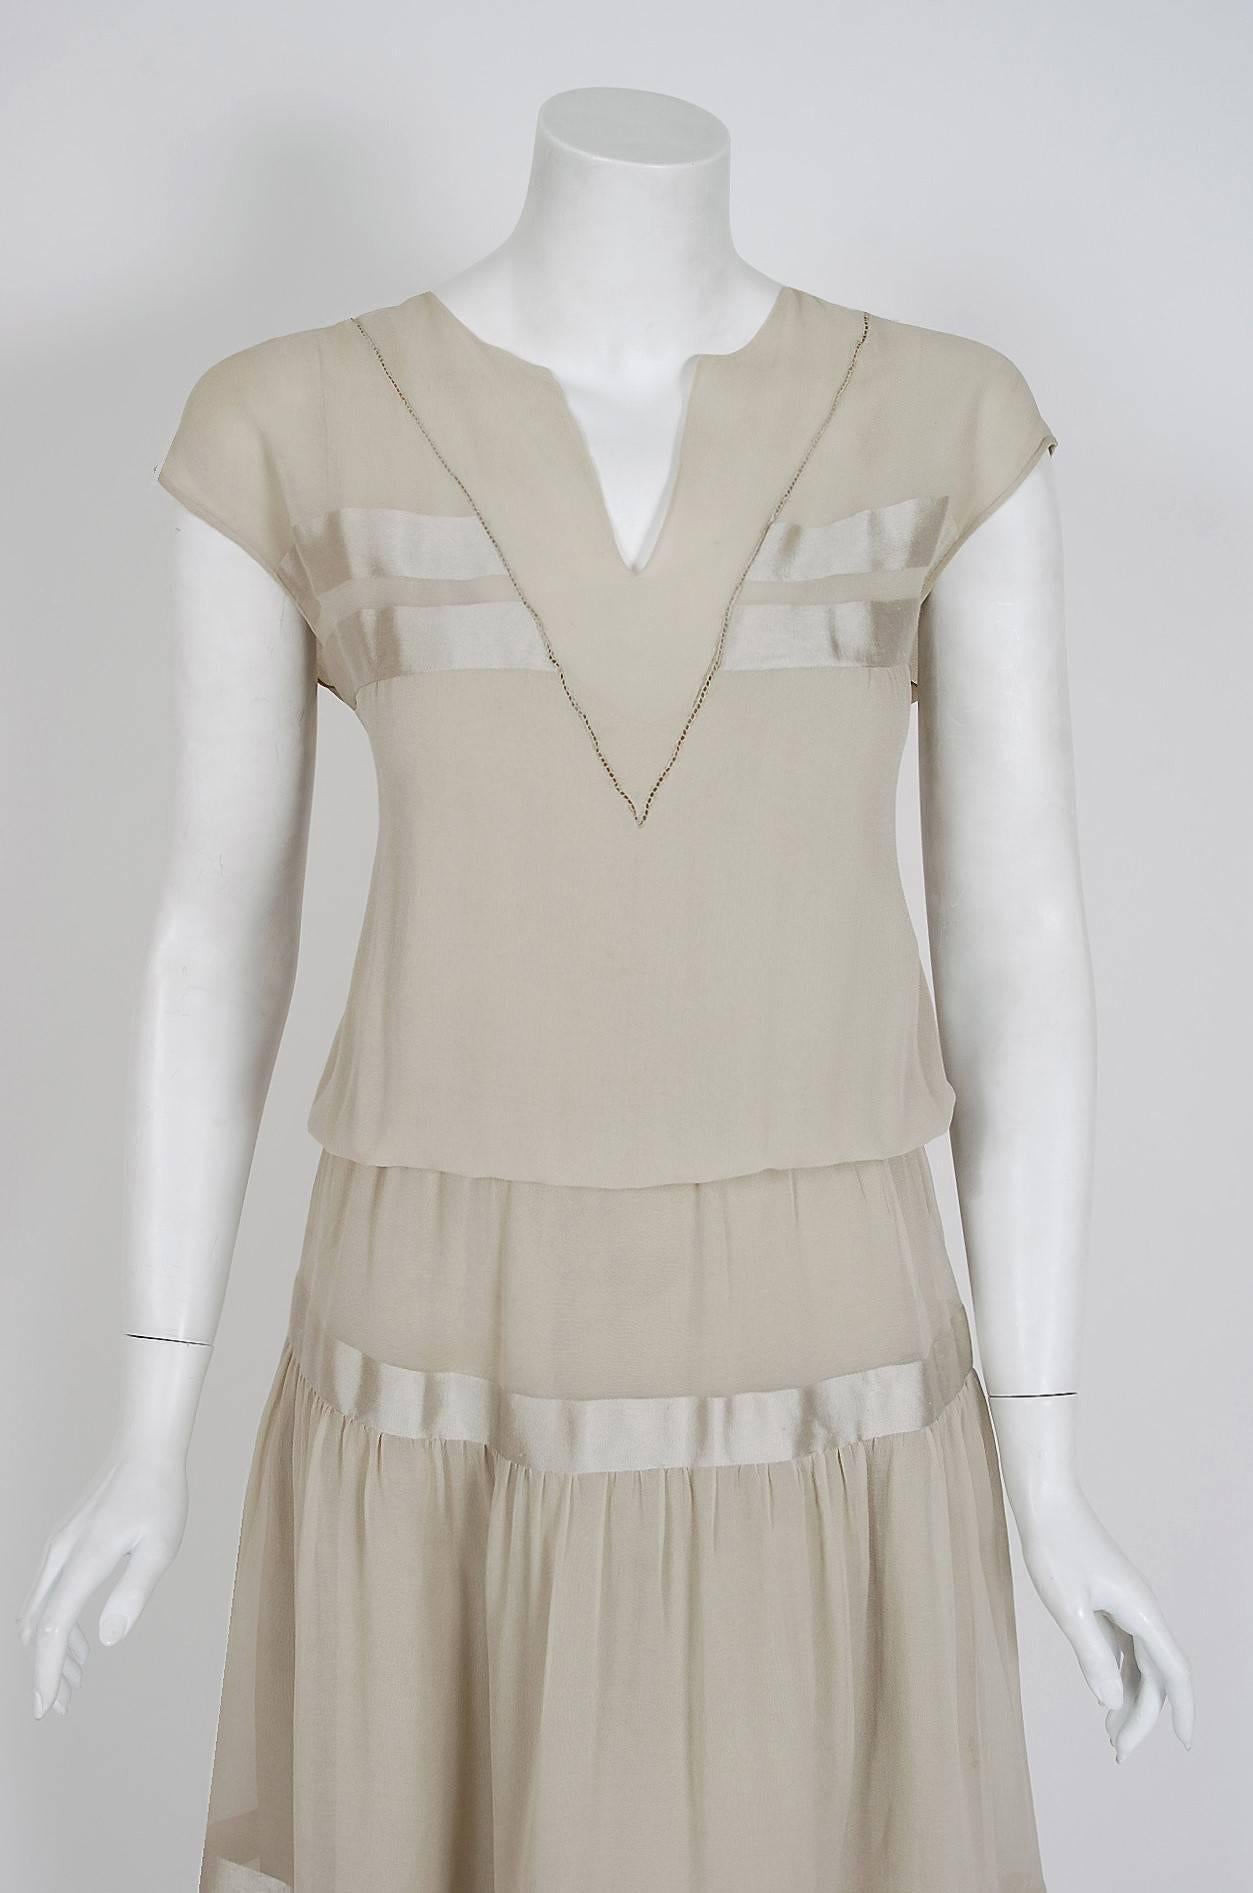 An ethereal and breathtaking 1970's Karl Lagerfeld for Chloe silk-chiffon peasant dress. He uses an ingenious silk-charmeuse striped technique which really gives the garment so much depth and texture. I really love the grey-putty color used which